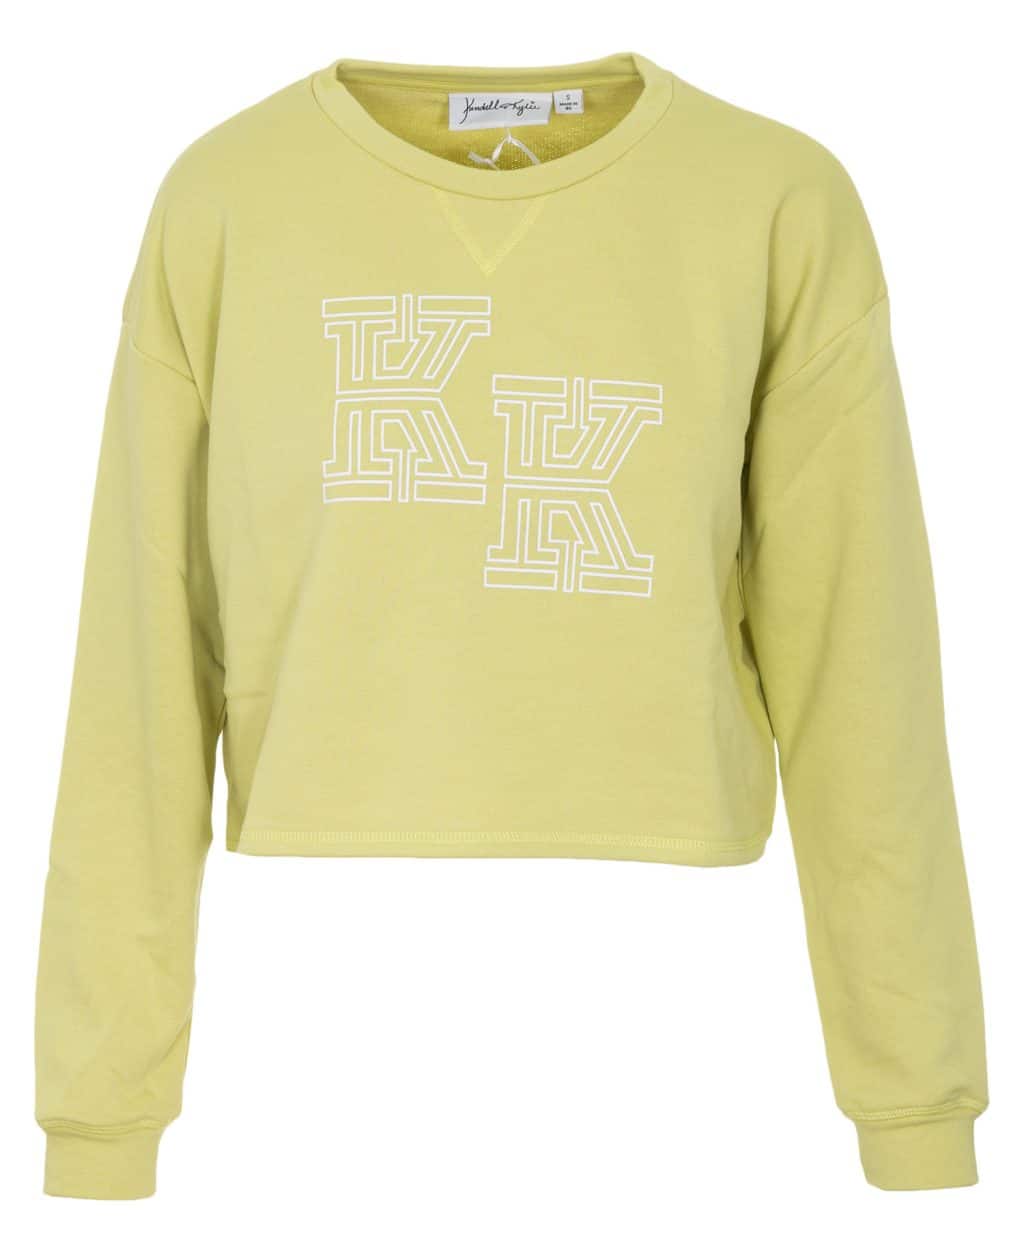 Clothing KENDALL AND KYLIE BASIC COLLEGE SWEATSHIRT